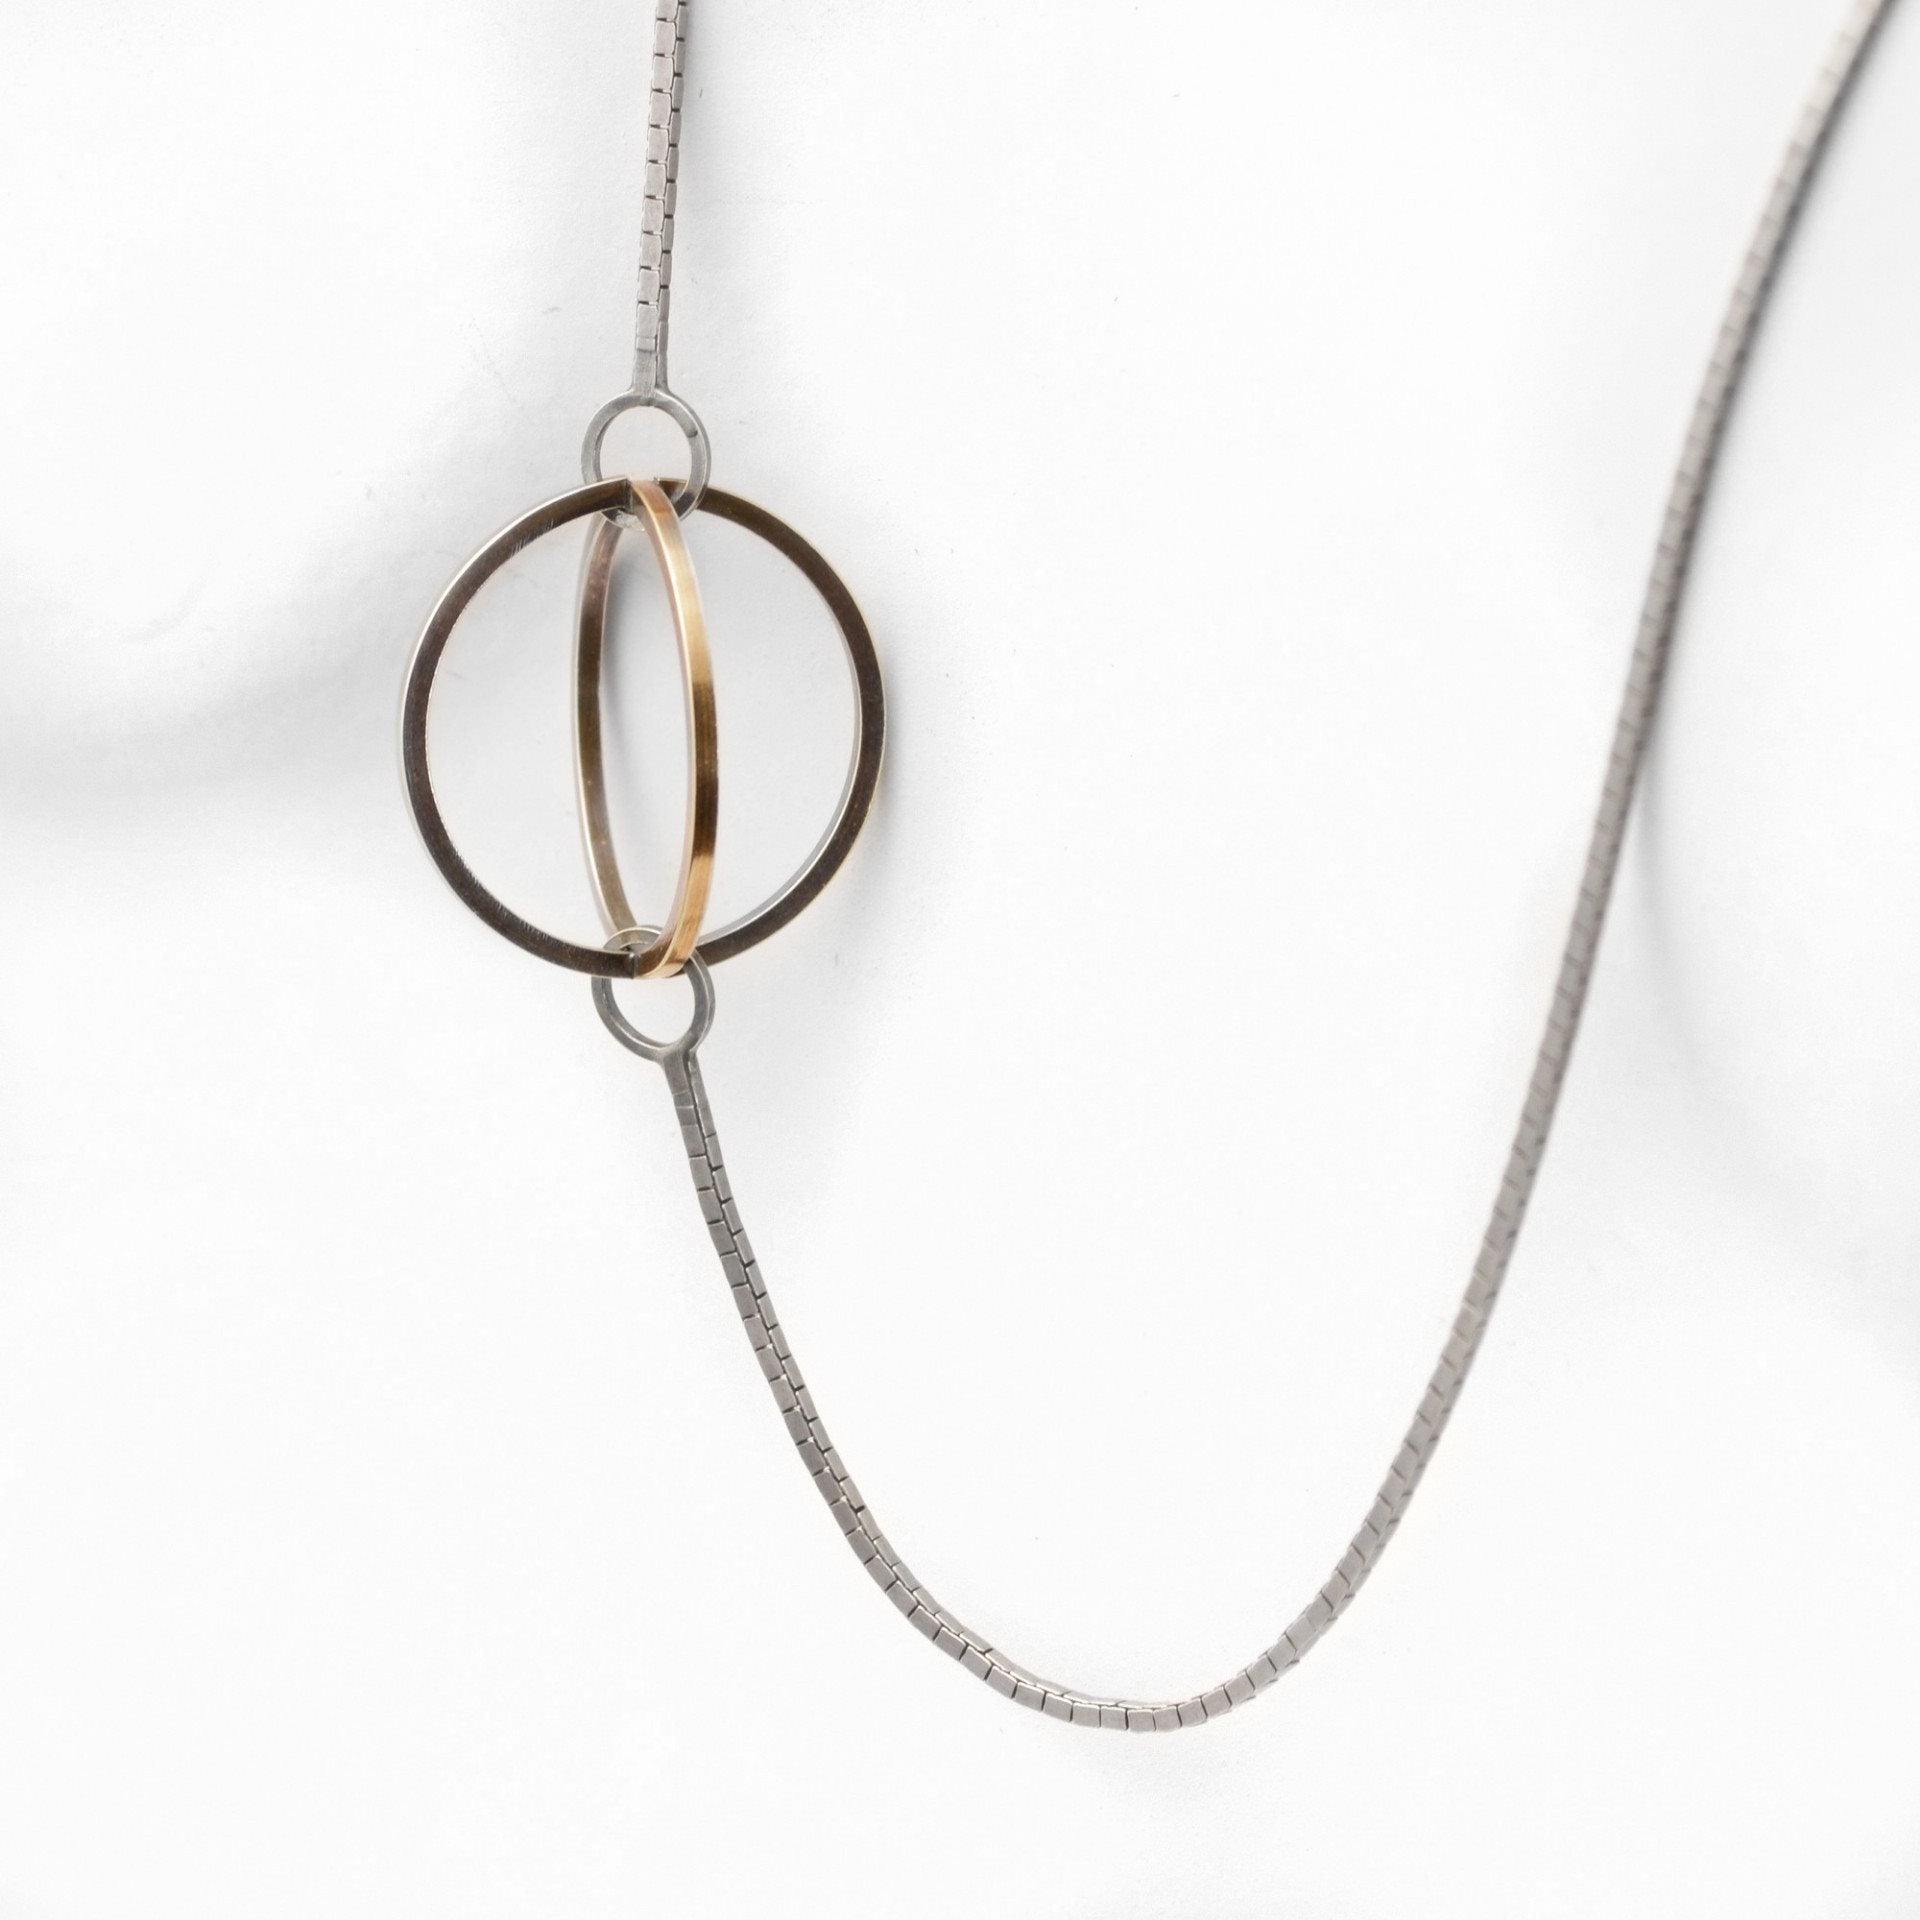 Blackened Sterling Silver and 22k Gold enhance the Geometric Shapes of this Lattis Long Necklace